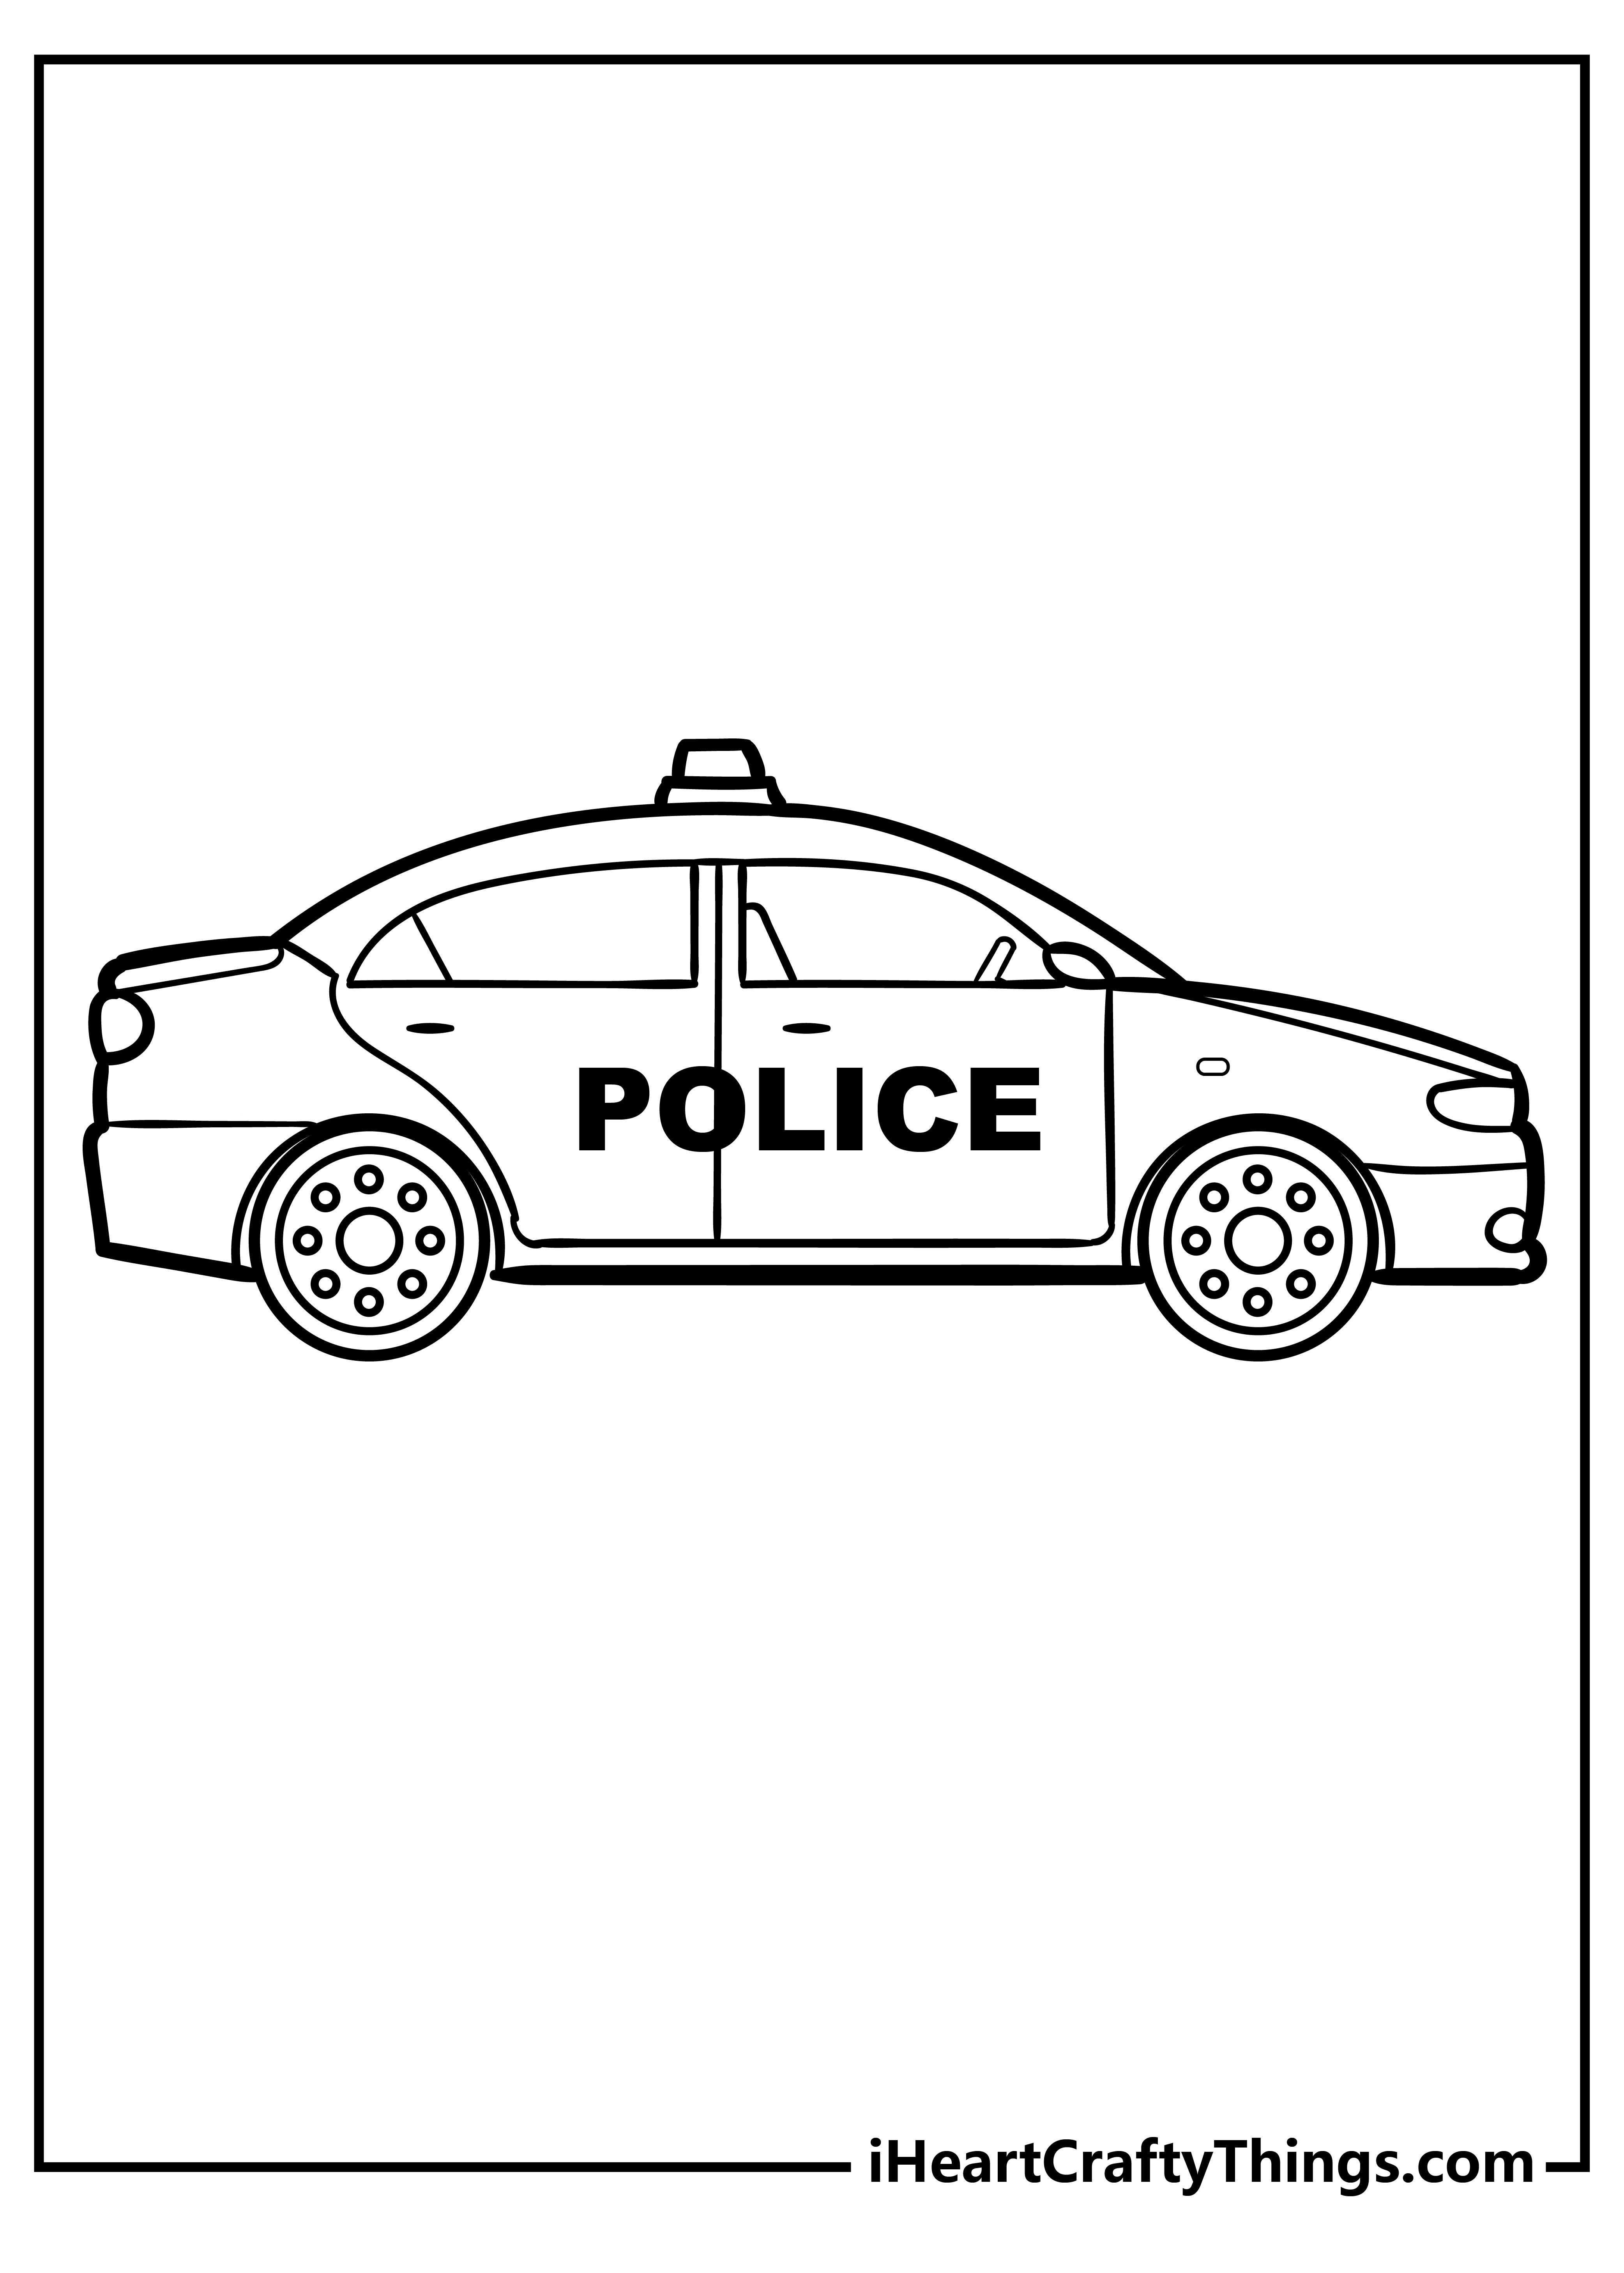 Police car coloring pages free printables